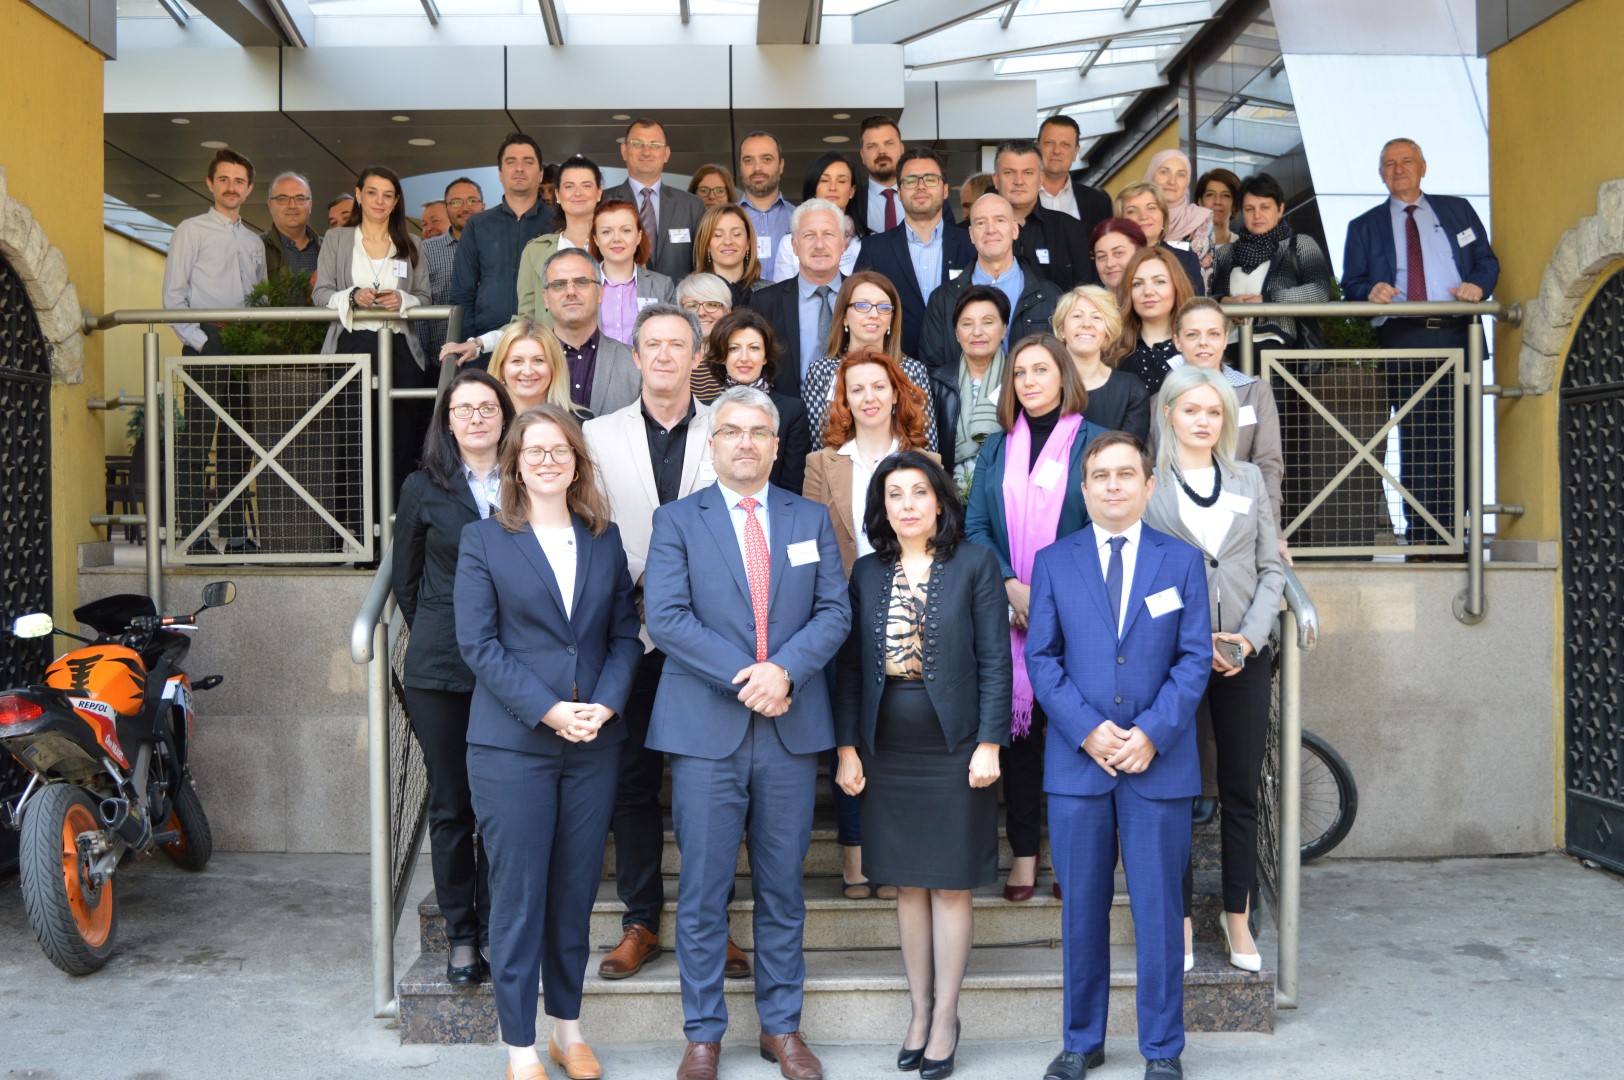 10 May 2019 – Workshop on “Strengthening regional dialogue and cooperation on migration” in Skopje